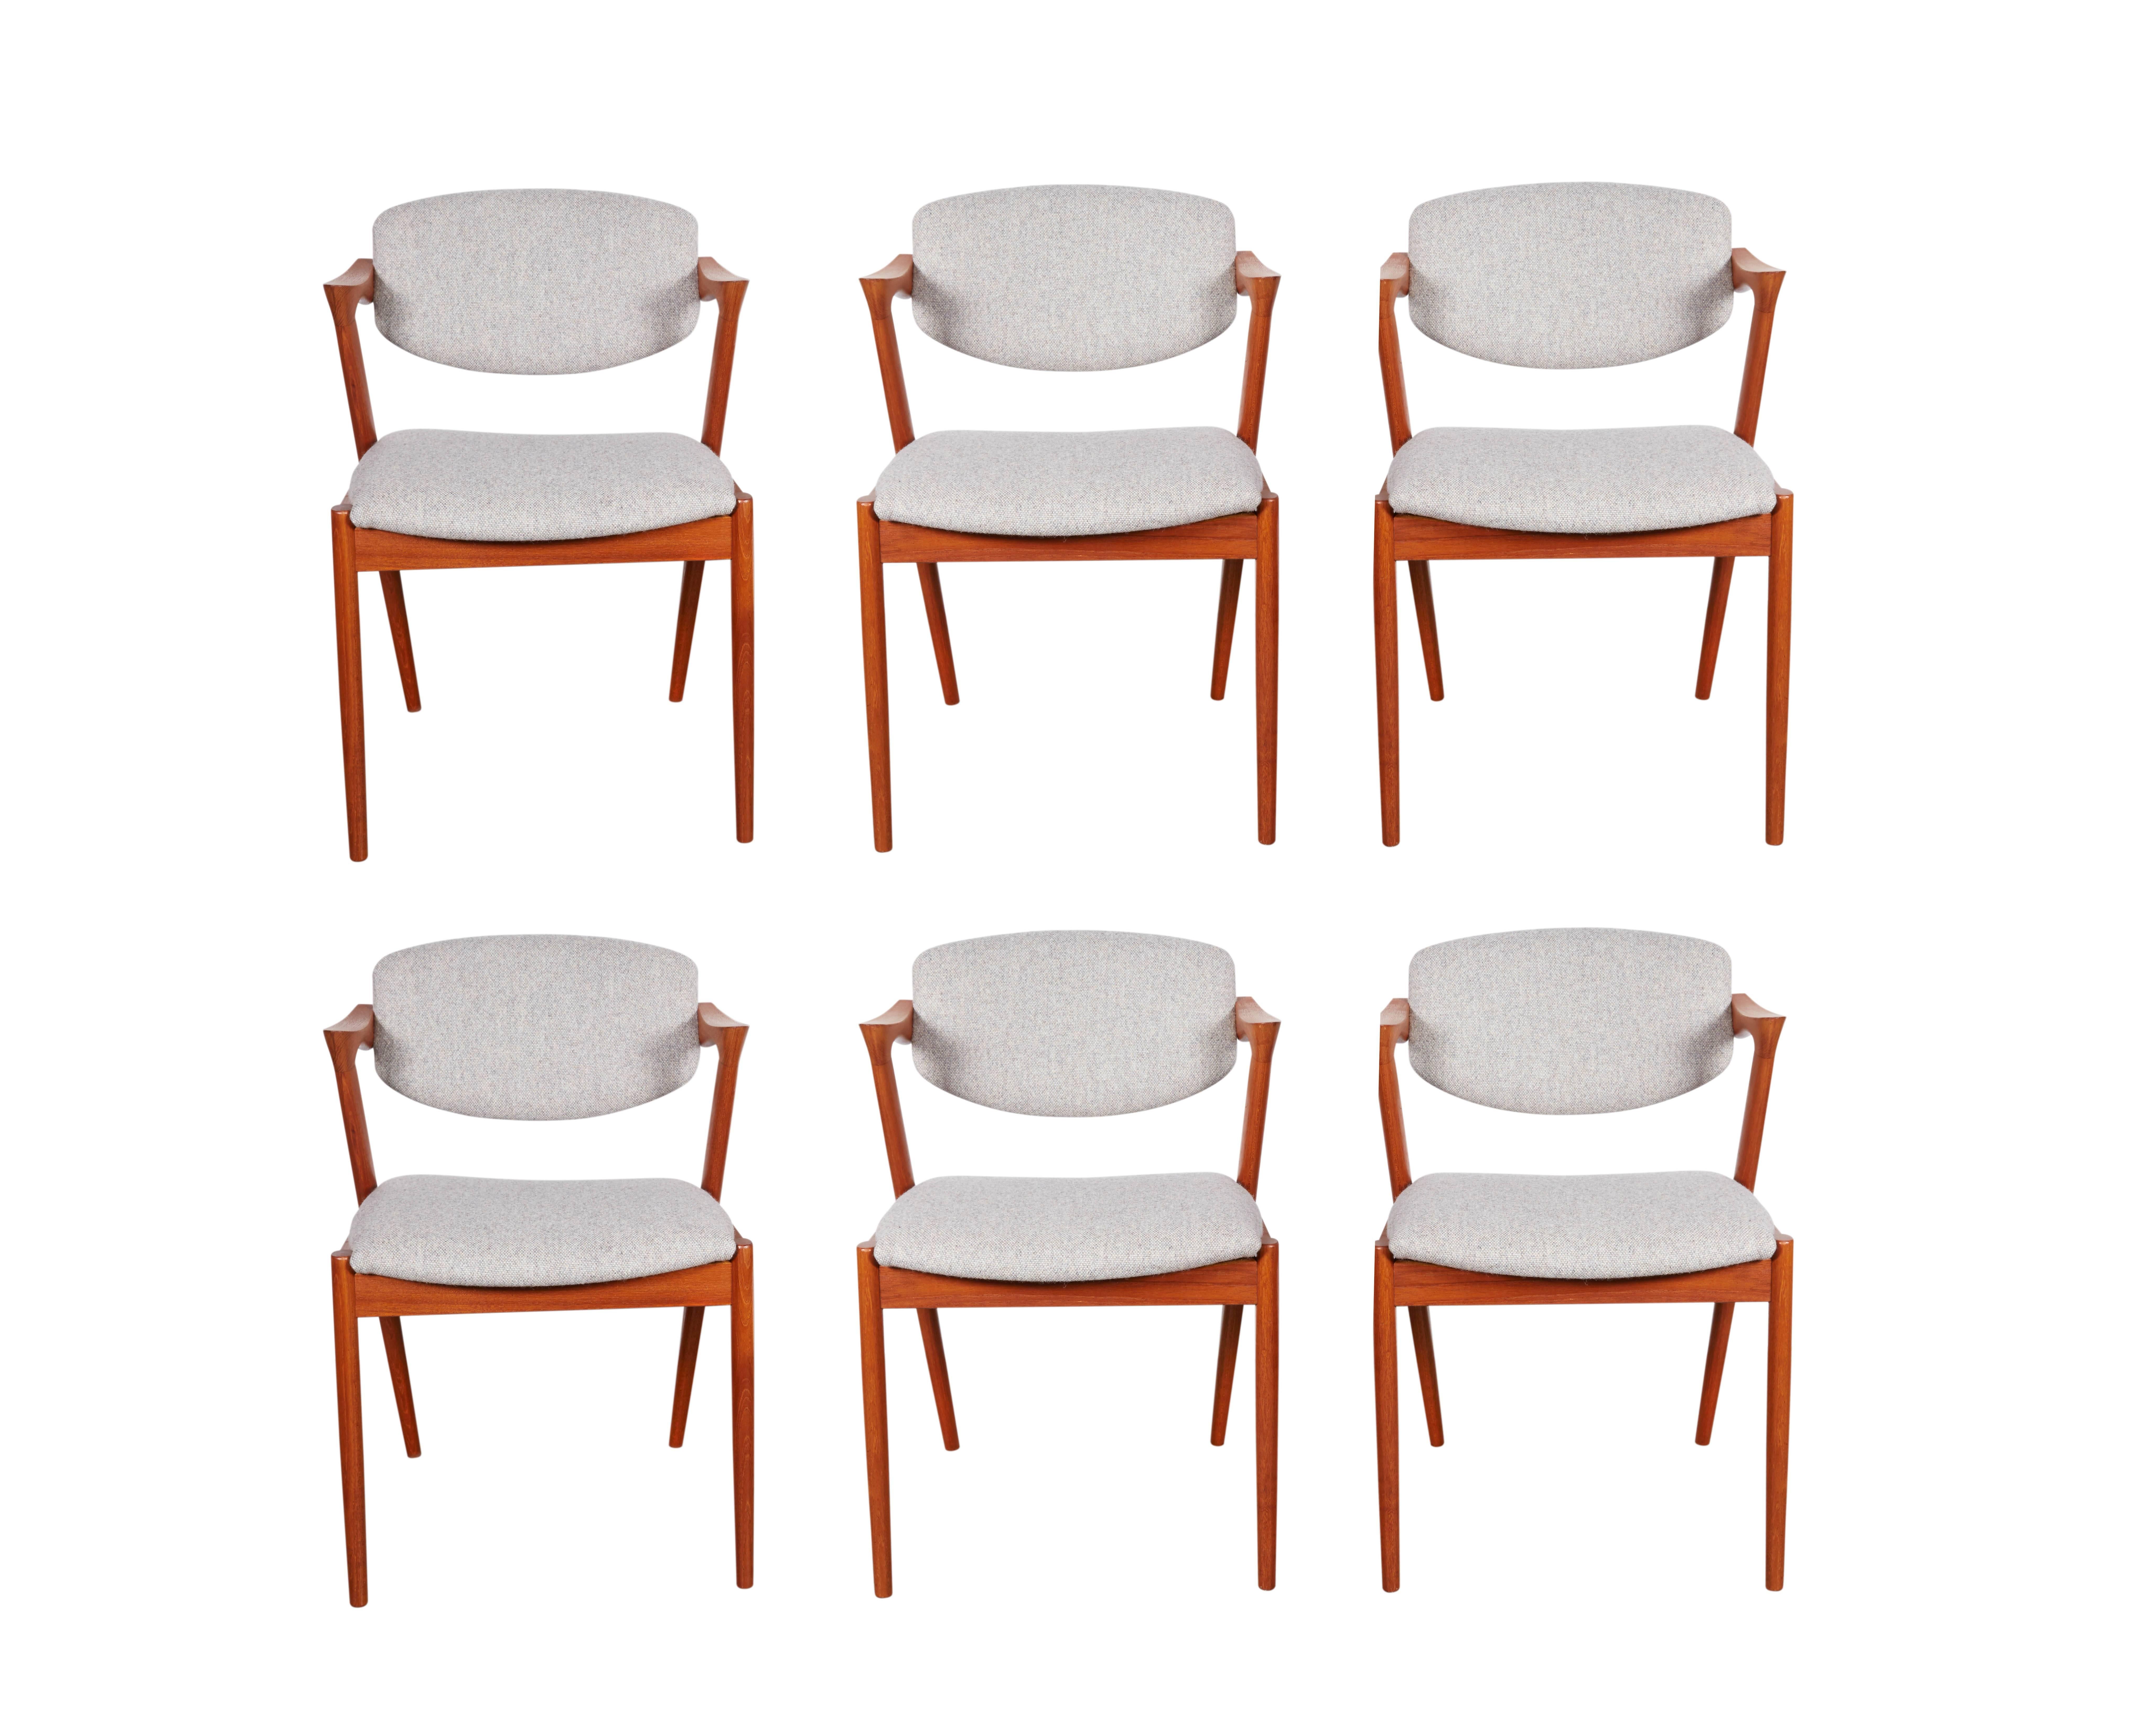 Vintage 1950s Teak Danish Dining Chairs by Kai Kristiansen

NOTE: THIS IS A SET OF 4 (PICTURE IS WRONG)

These vintage side chairs are in like-new condition. The swivel back that adjust to the angle your back makes it like a little lounge chair at